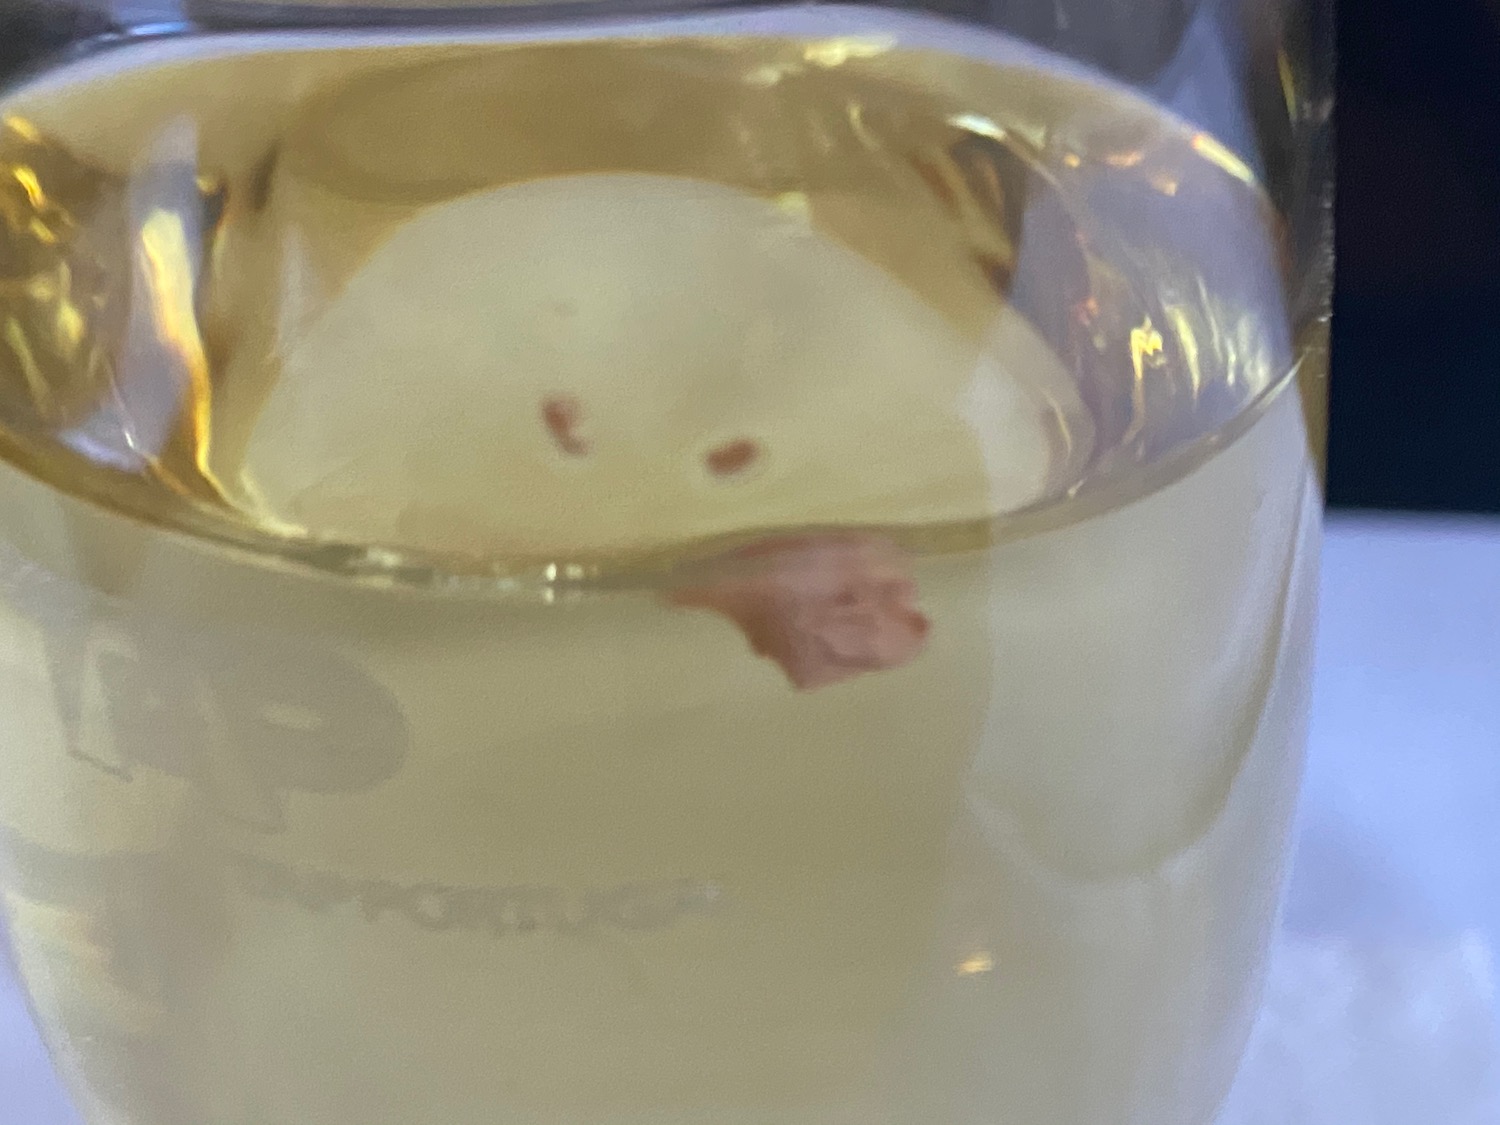 a small white object in a glass of liquid